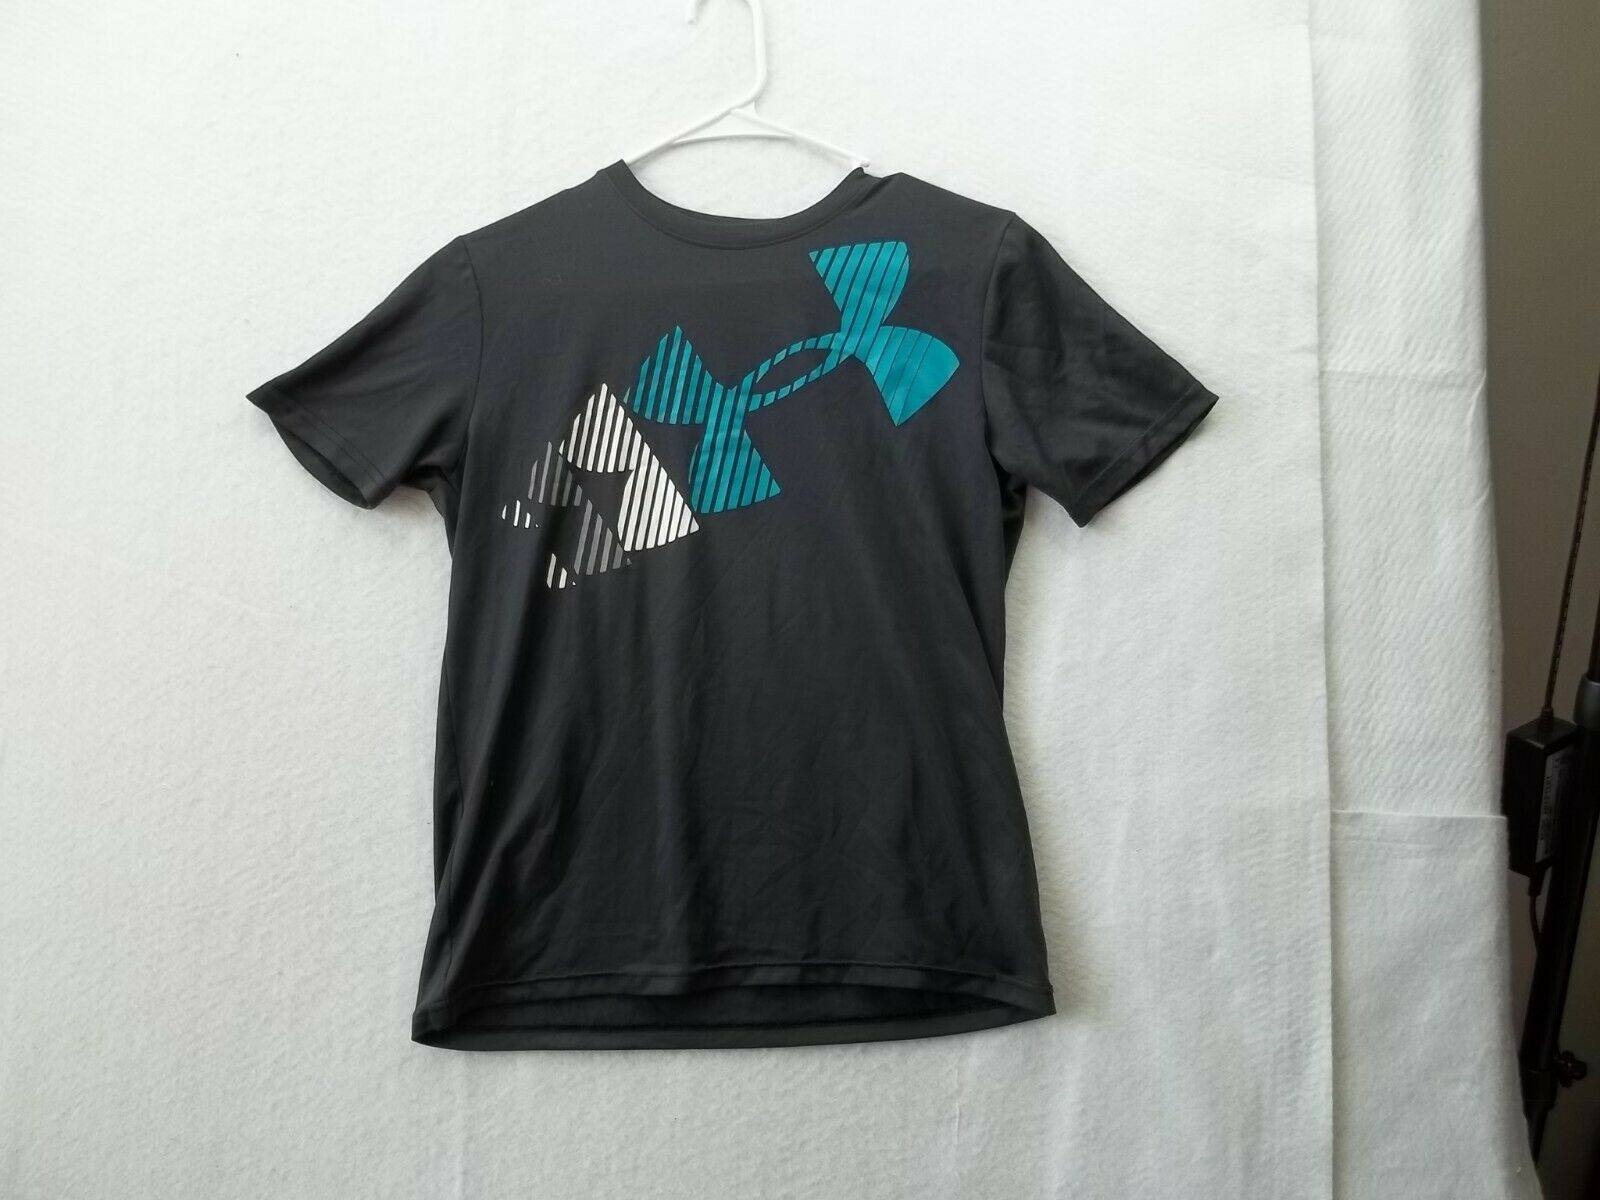 Under Armour Youth Boys Athletic Graphic Tee Shirt Size L Black & Teal Ex Cond!